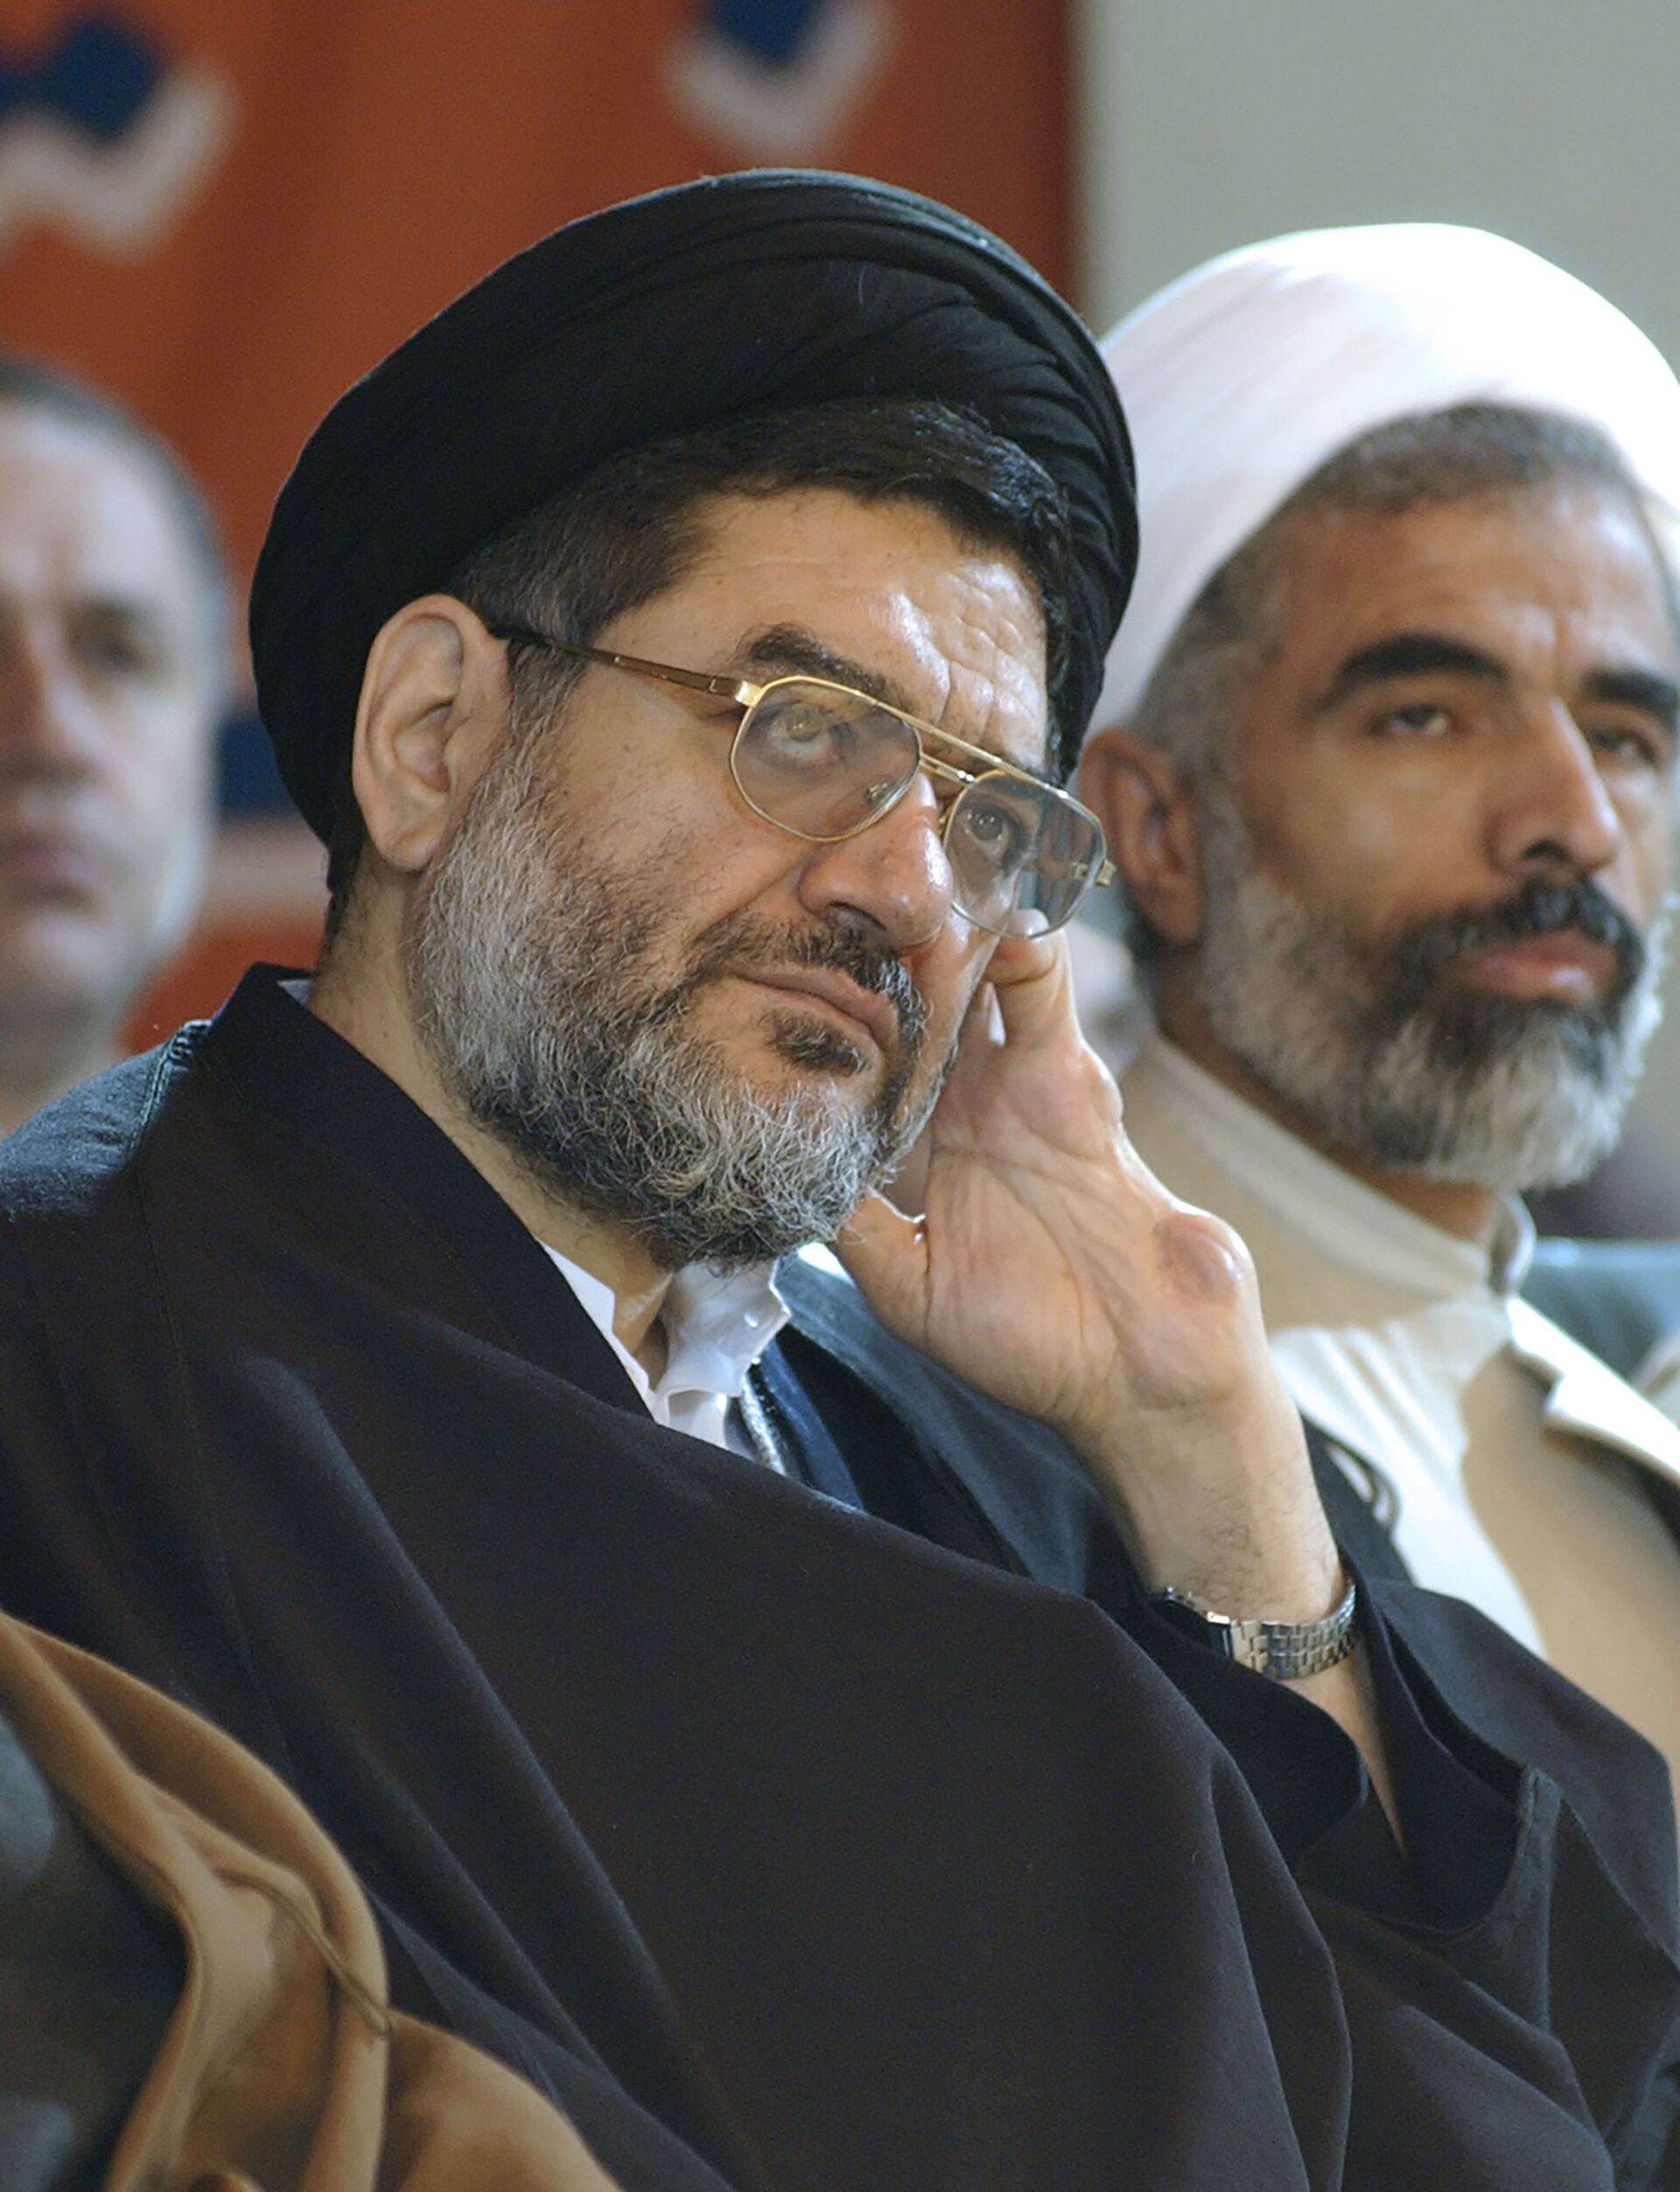 Iranian Cleric Who Allegedly Founded Lebanese Hezbollah Dead Due to COVID-19 - Sputnik International, 1920, 07.06.2021